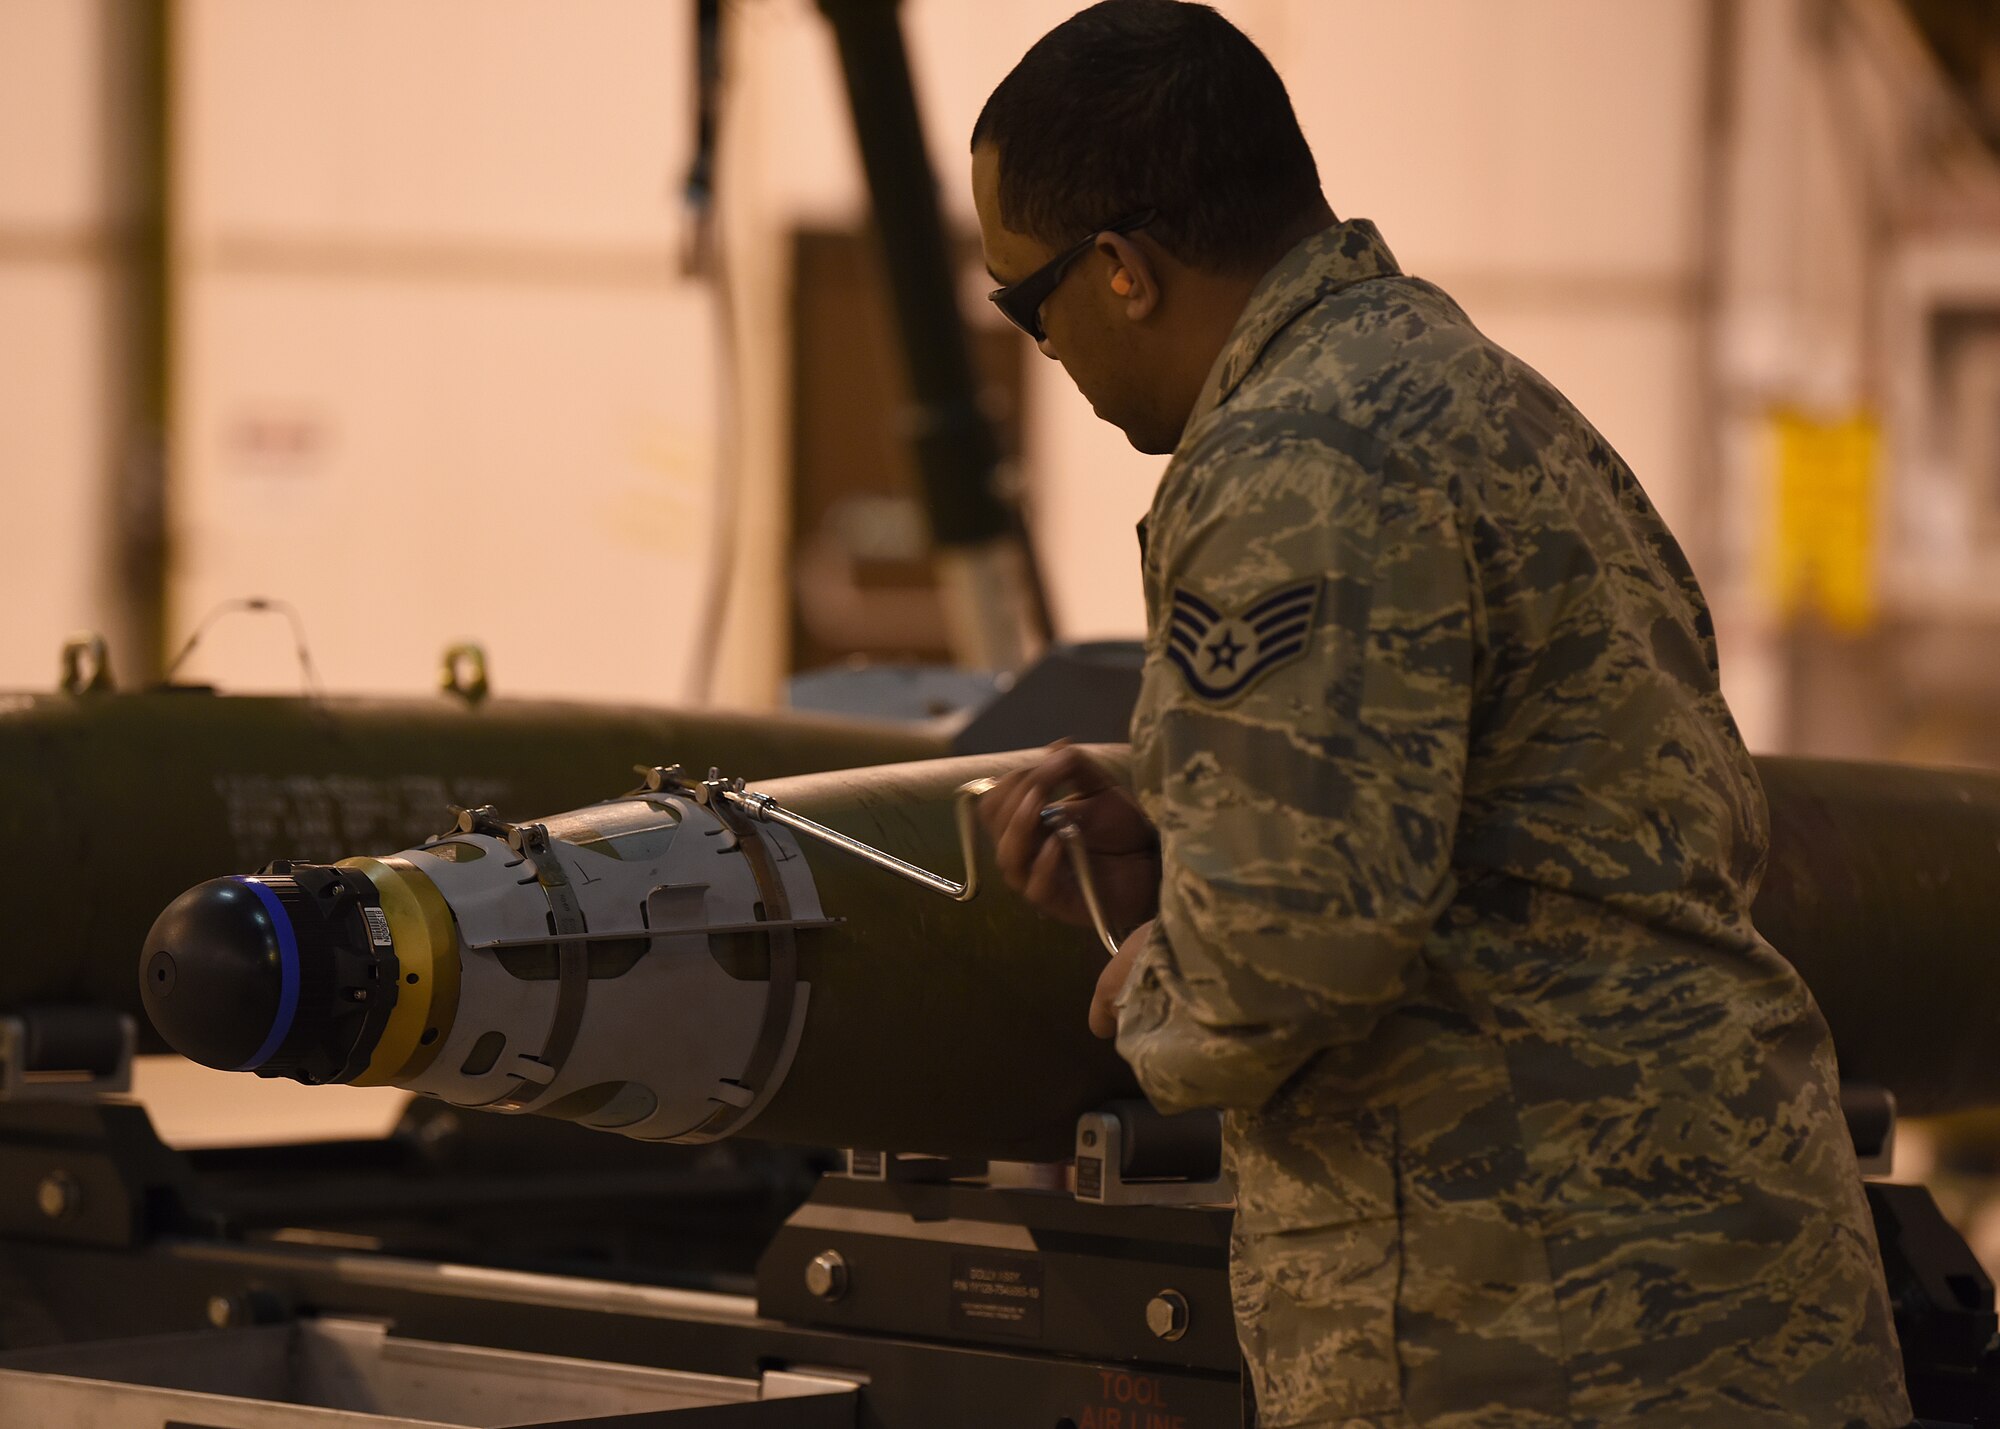 Staff Sgt. Deion Montana-Graham, 48th Munition Squadron conventional maintenance supervisor, uses a speed handle wrench to install the front strakes on an inert ordnance at Royal Air Force Lakenheath, England, Jan. 23, 2019. Practicing for the Air Force Combat Operations Competition provides a training opportunity for noncommissioned officers and Airmen they don’t normally get during day-to-day operations. (U.S. Air Force photo by Airman 1st Class Madeline Herzog)